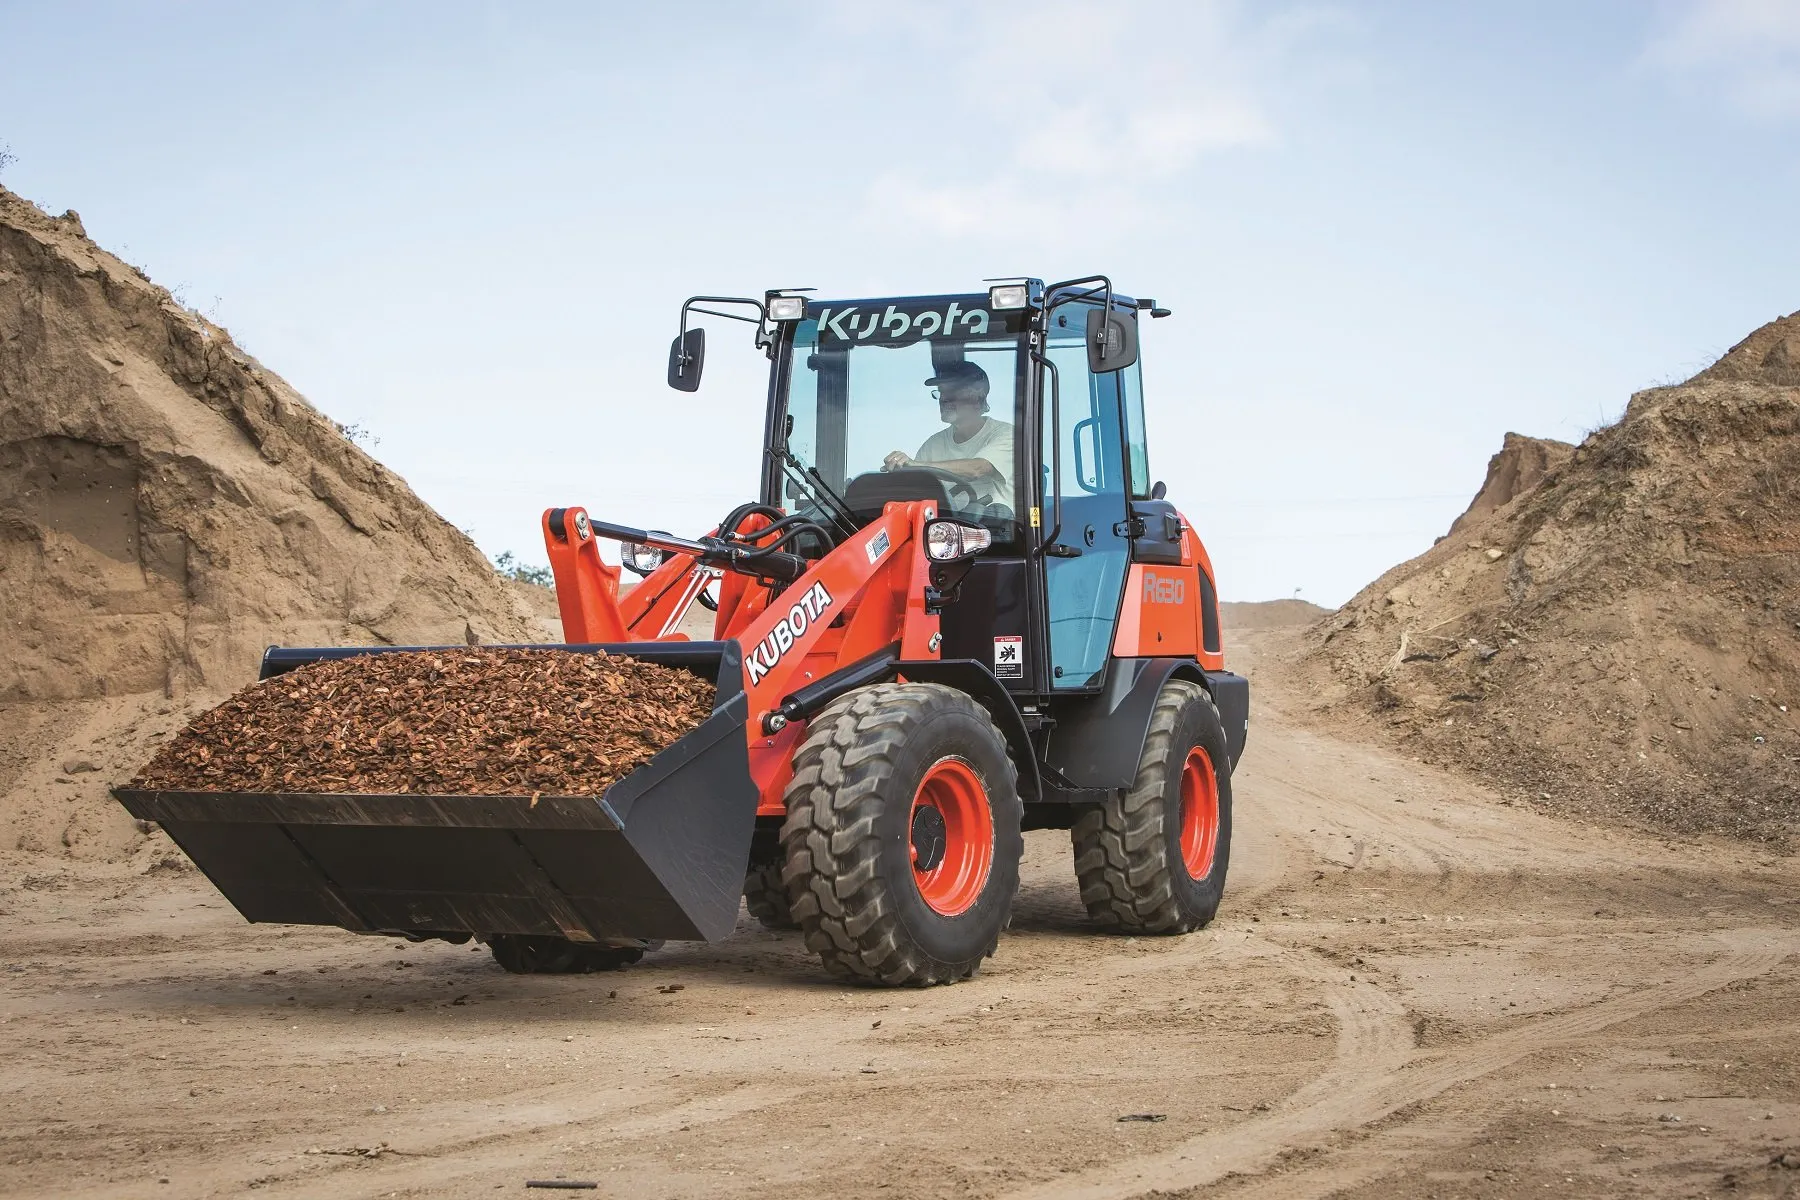 Find the Kubota wheel loader you need, at the most competitive price.